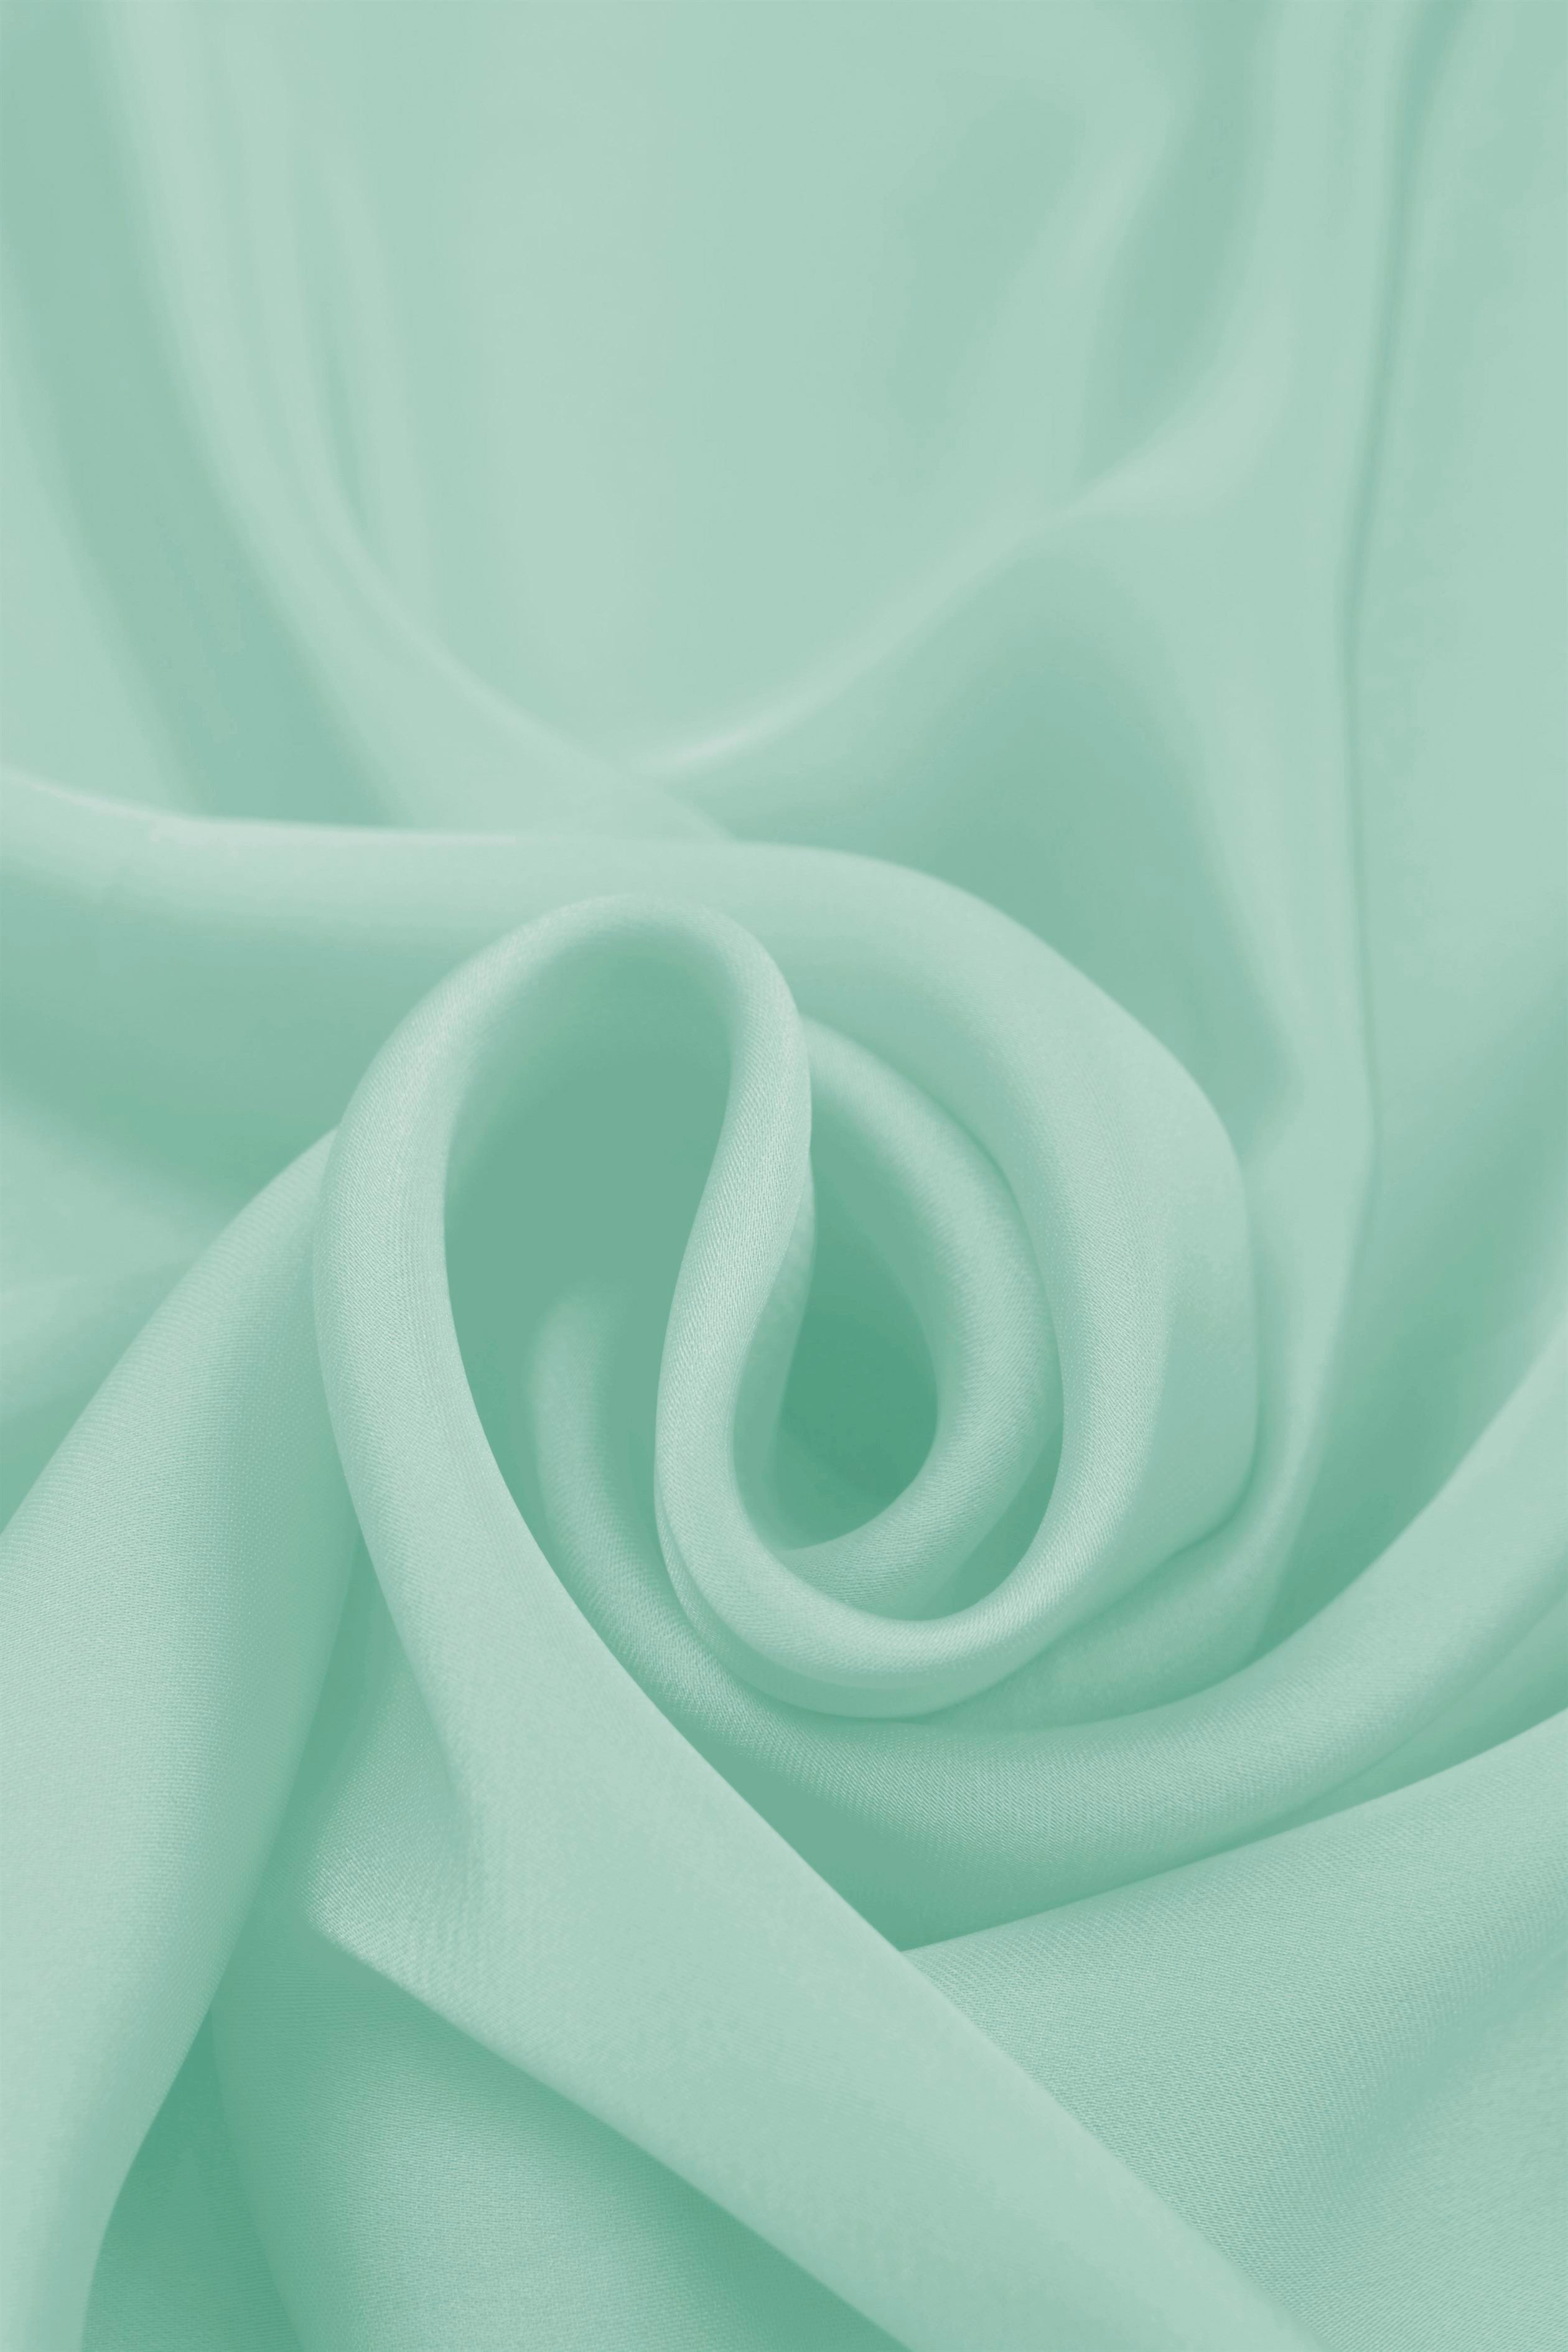 Glossy Mint Plain Dyed Satin Georgette Fabric